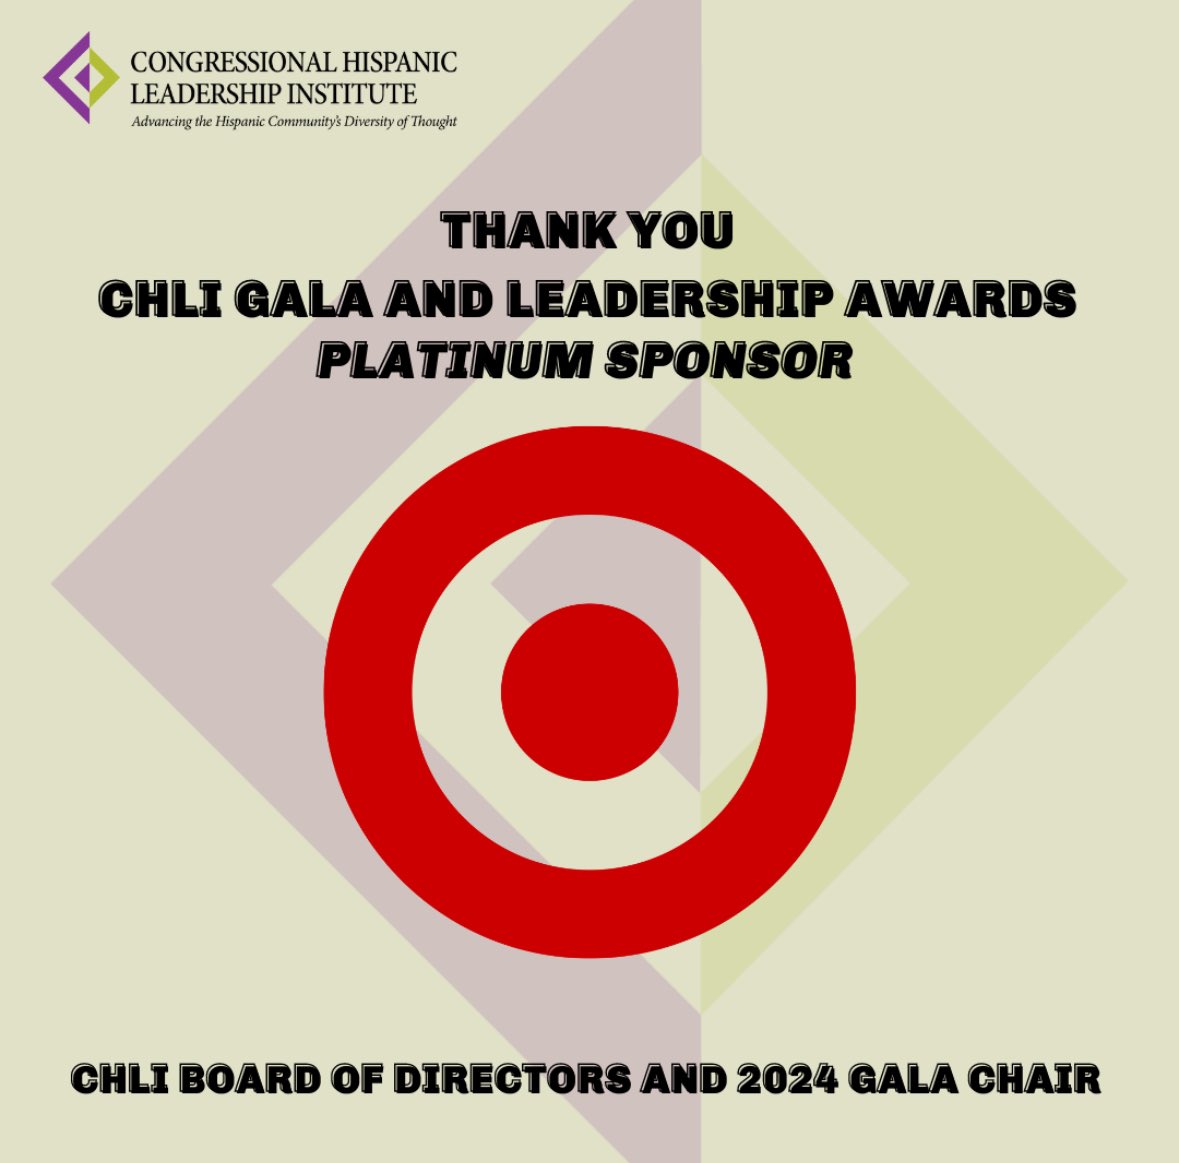 Thank you, @target, for your Platinum sponsorship of the CHLI 2024 Gala and Leadership Awards. Your support for bipartisan internships empowers Hispanic college students and shapes future leaders. Cc: @isaacareyes #TheCHLI2024 #TargetSupports